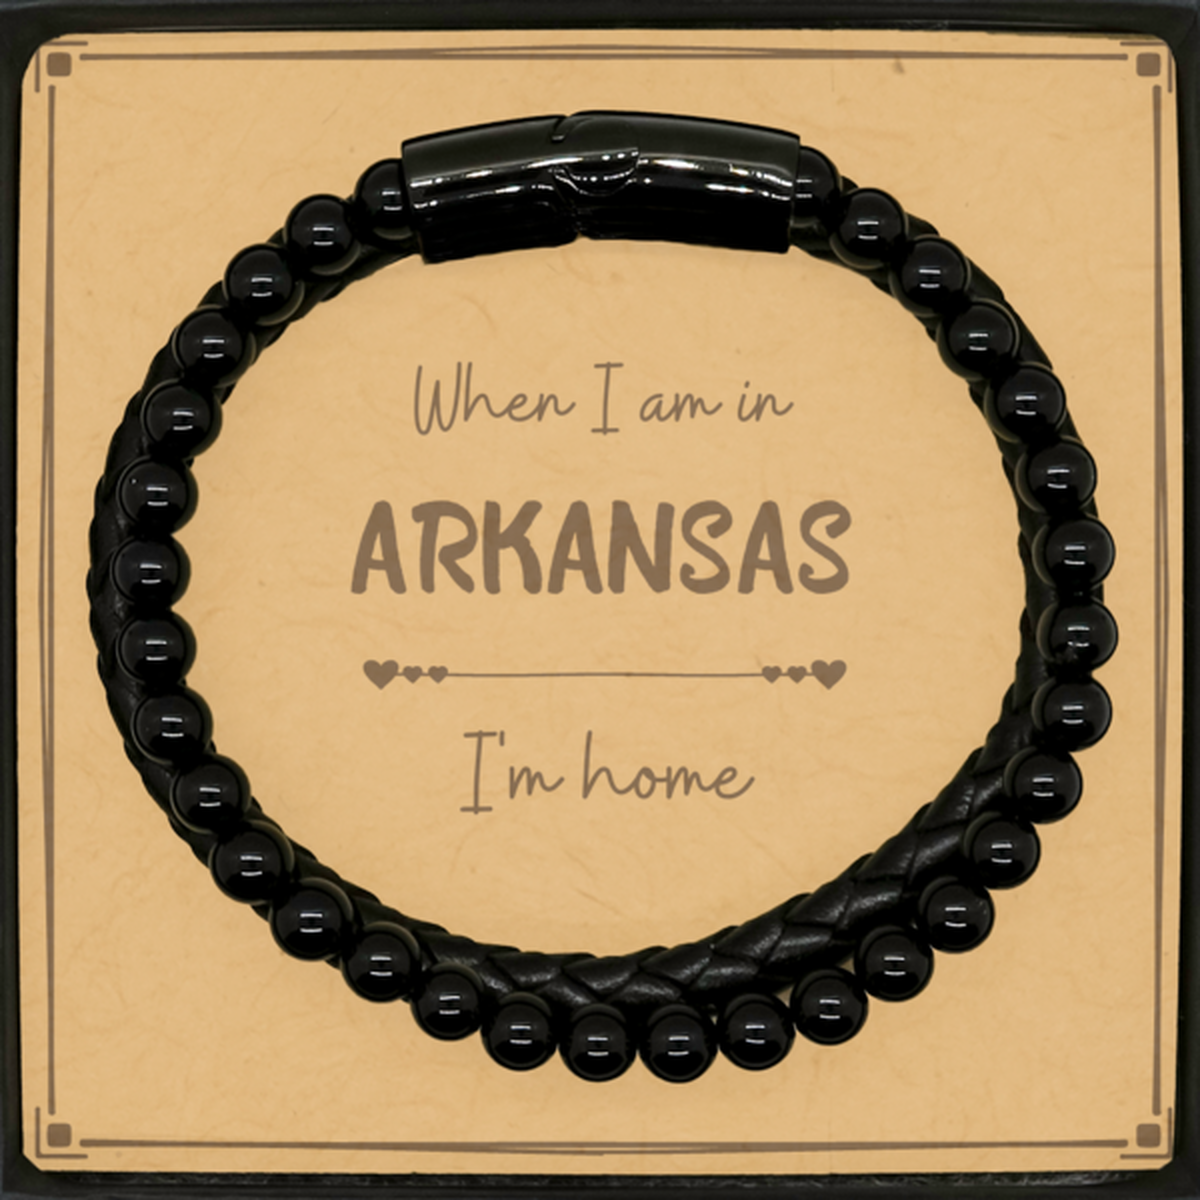 When I am in Arkansas I'm home Stone Leather Bracelets, Message Card Gifts For Arkansas, State Arkansas Birthday Gifts for Friends Coworker